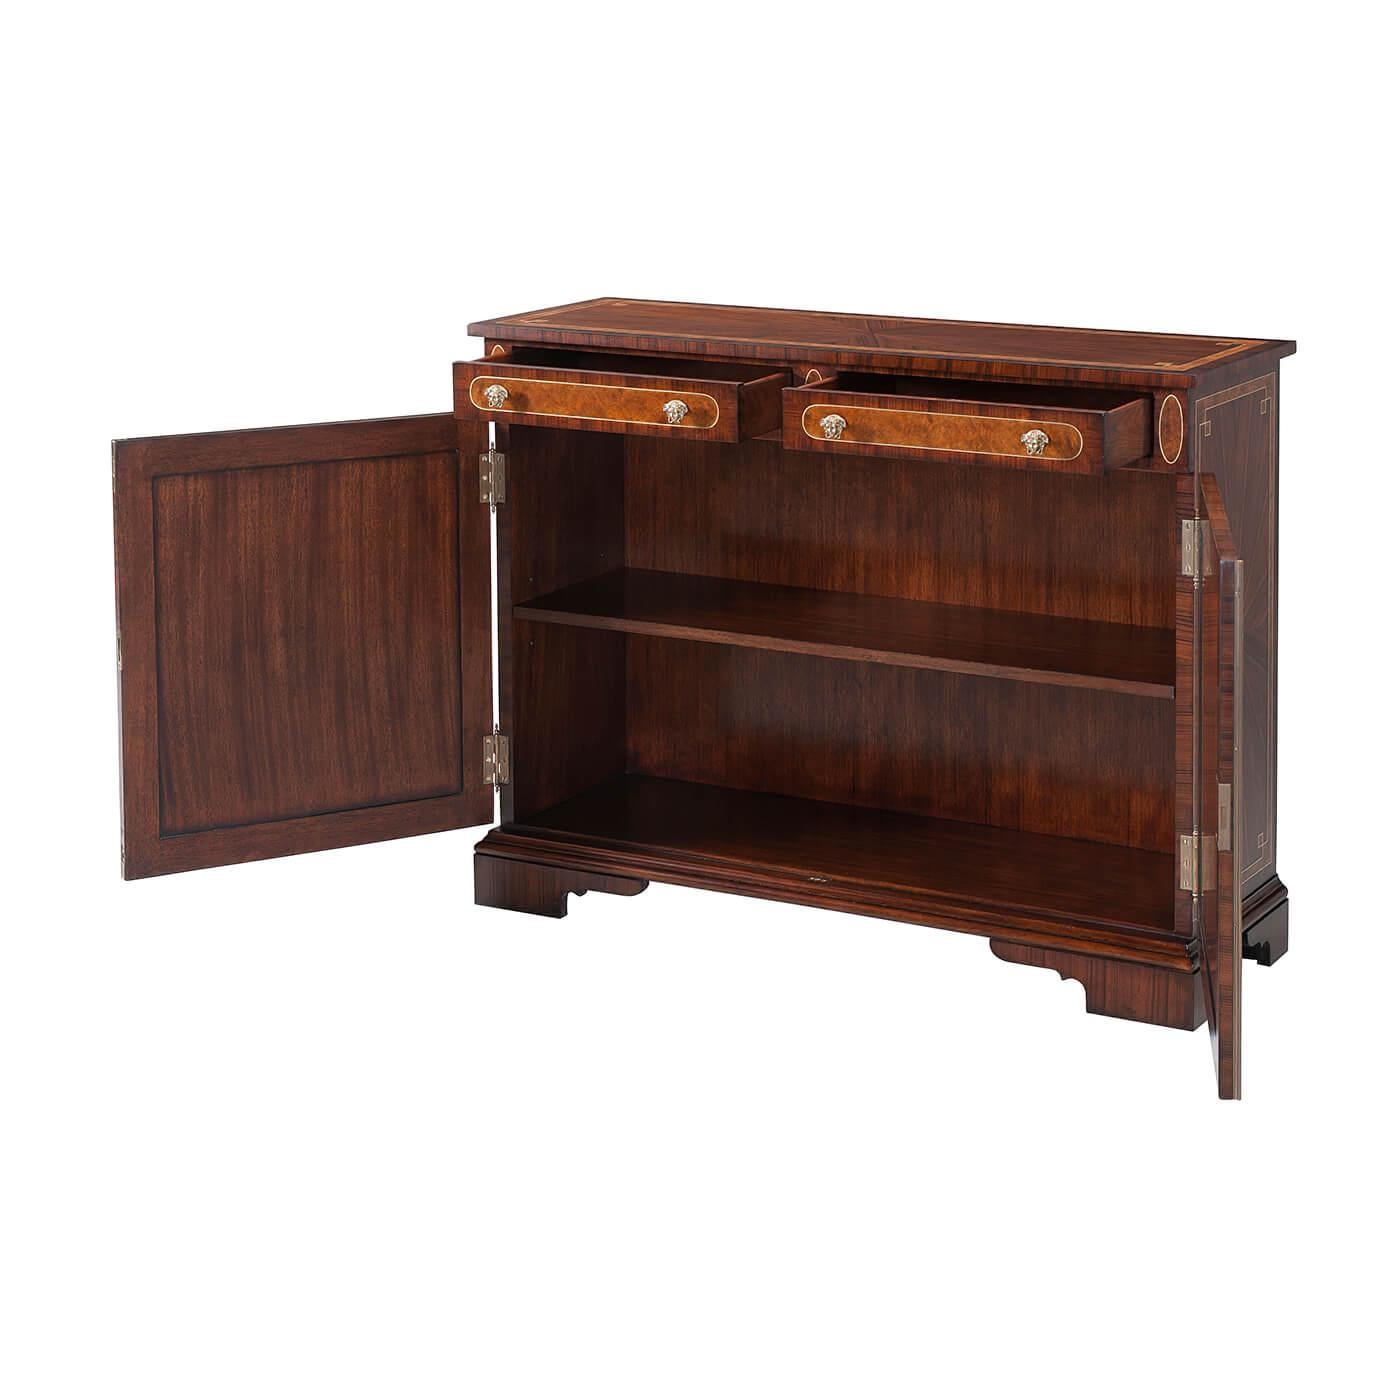 An exceptional Regency style rosewood, inlaid and brass strung side cabinet, the rectangular top above two frieze drawers with ovoid panel inlay, Medusa head brass handles and mounts to the radiating rosewood and banded cupboard doors enclosing an